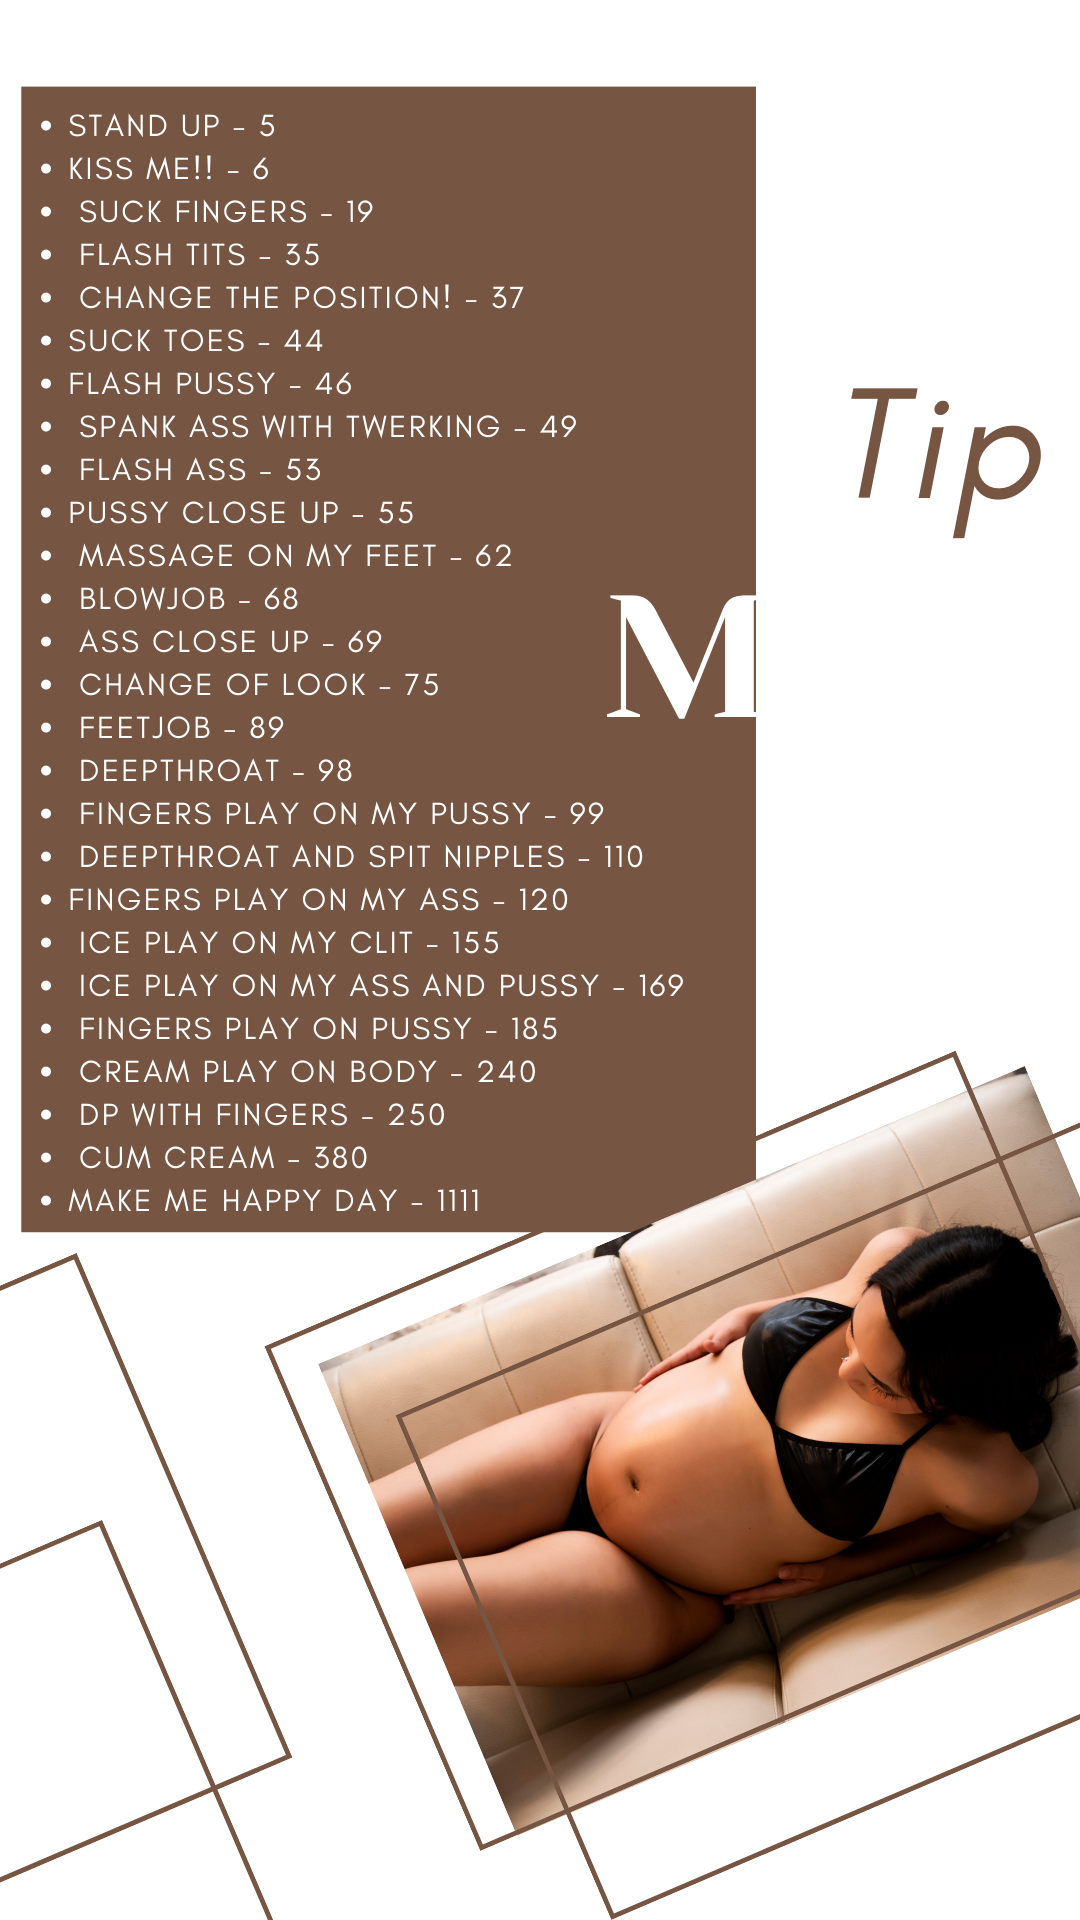 Gisell-Montoy tip menu image: 1